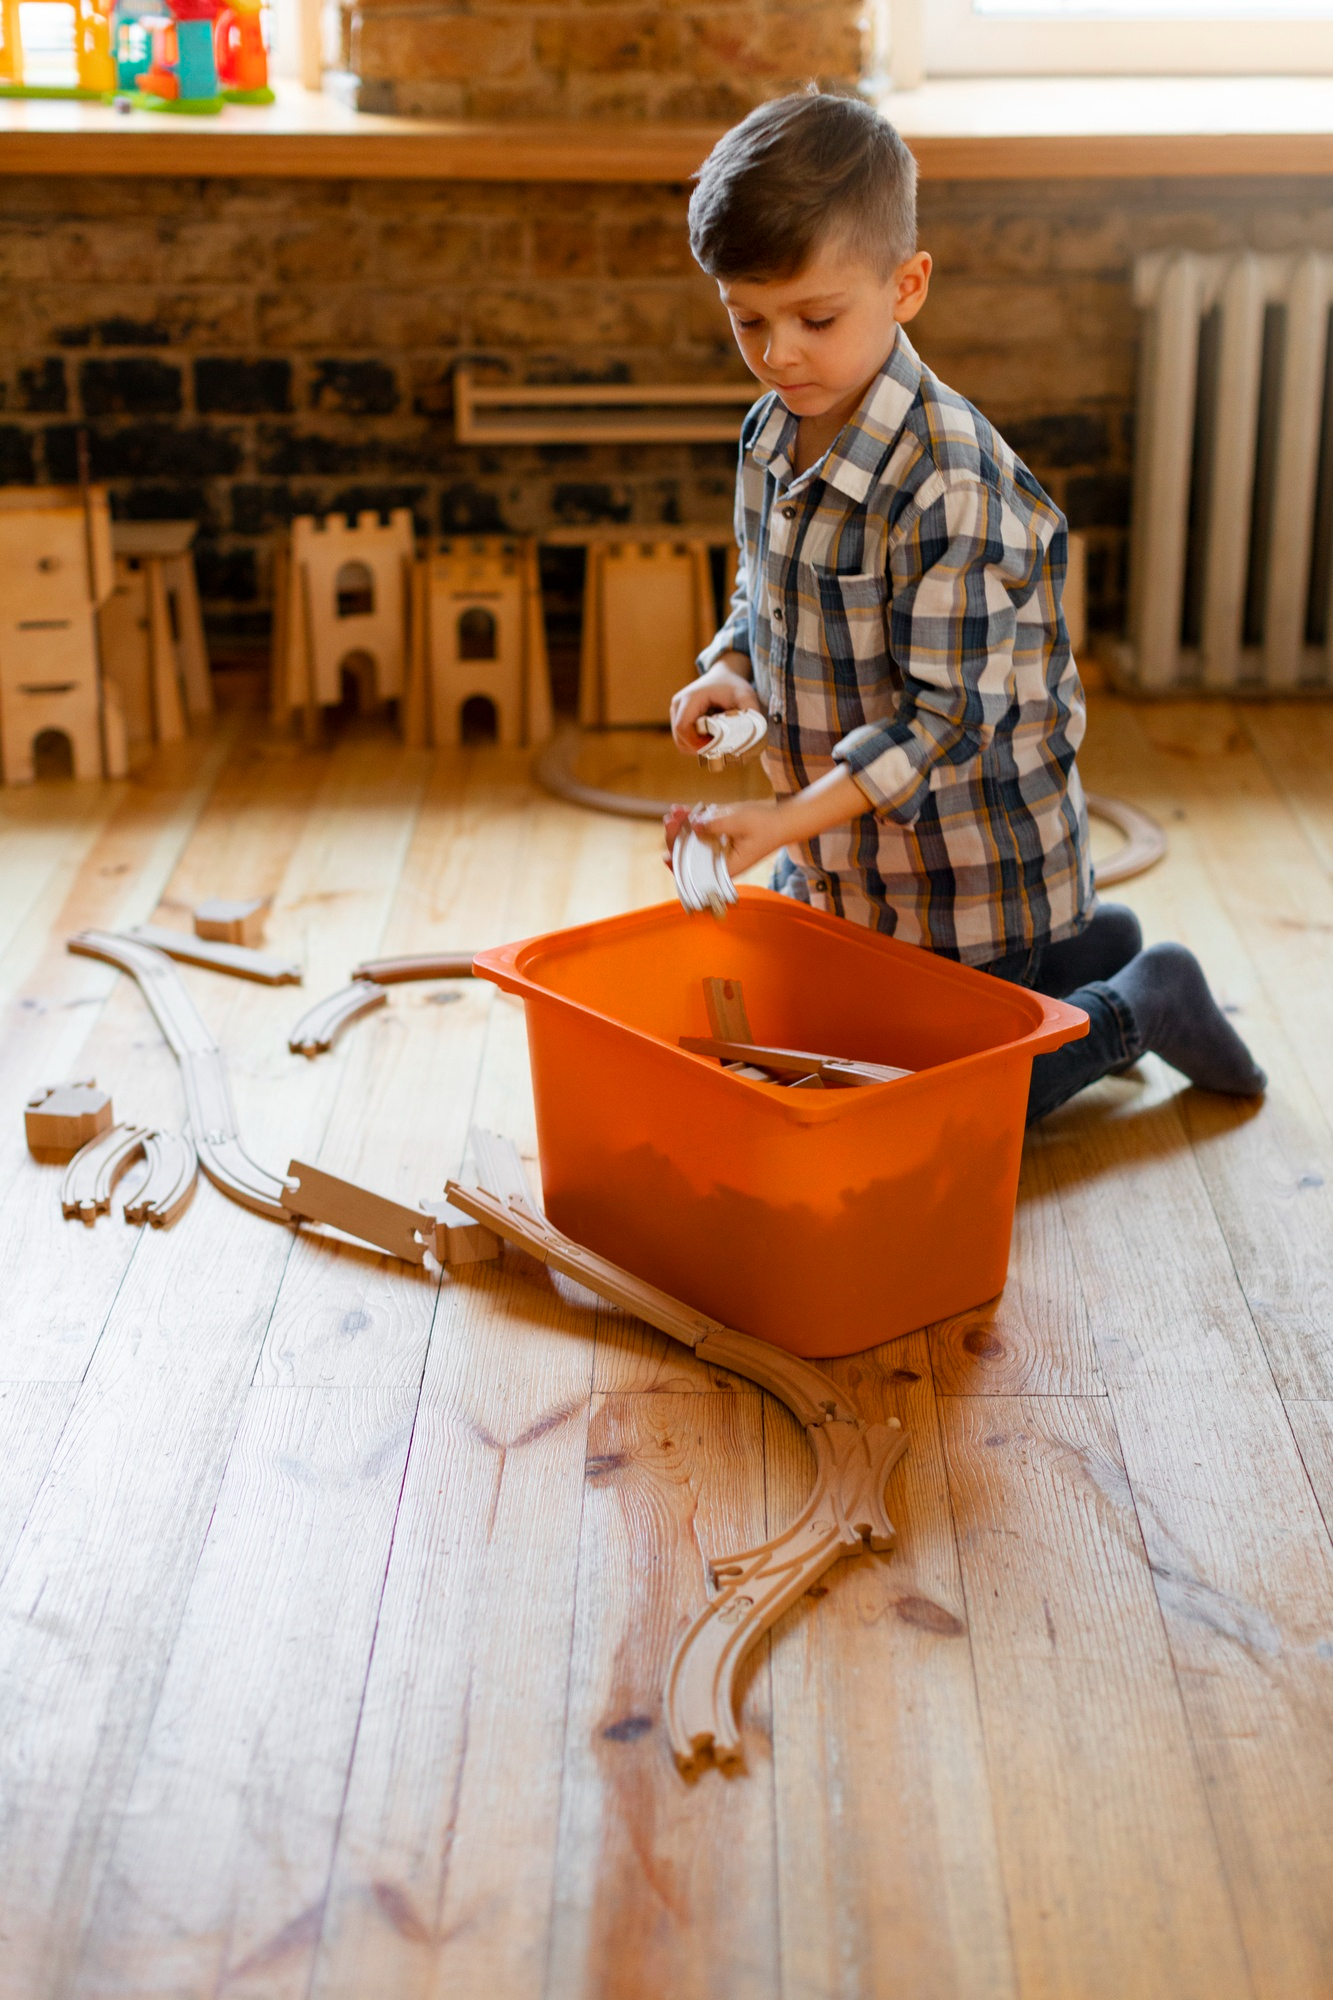 A little boy playing with wooden toys | Source: Freepik